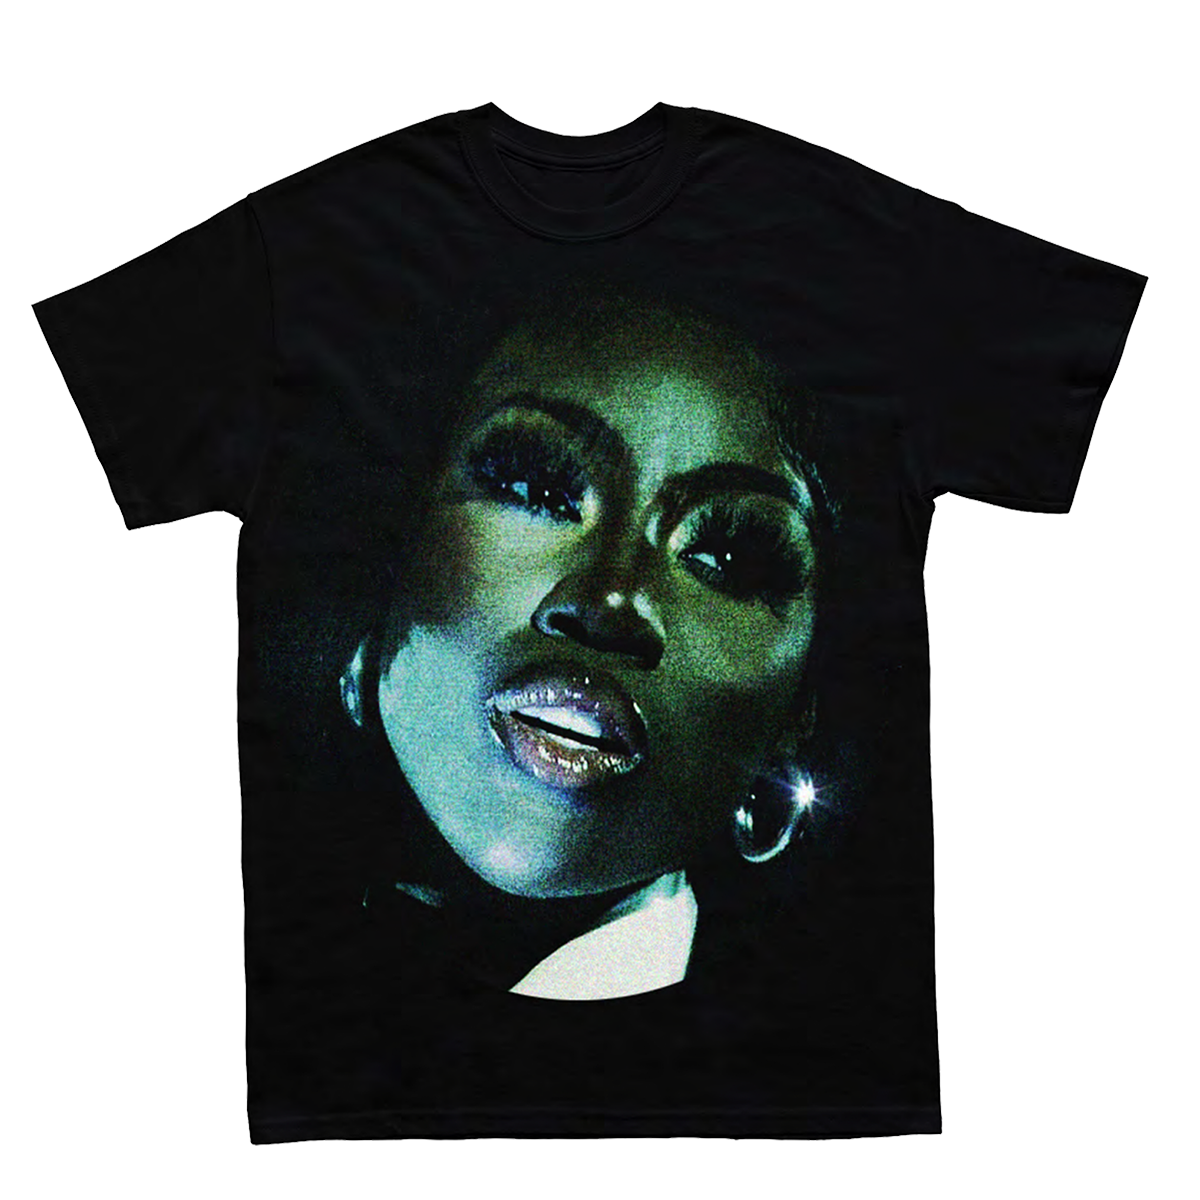 Bree Runway - Limited Edition Green UK Debut Tour Tee